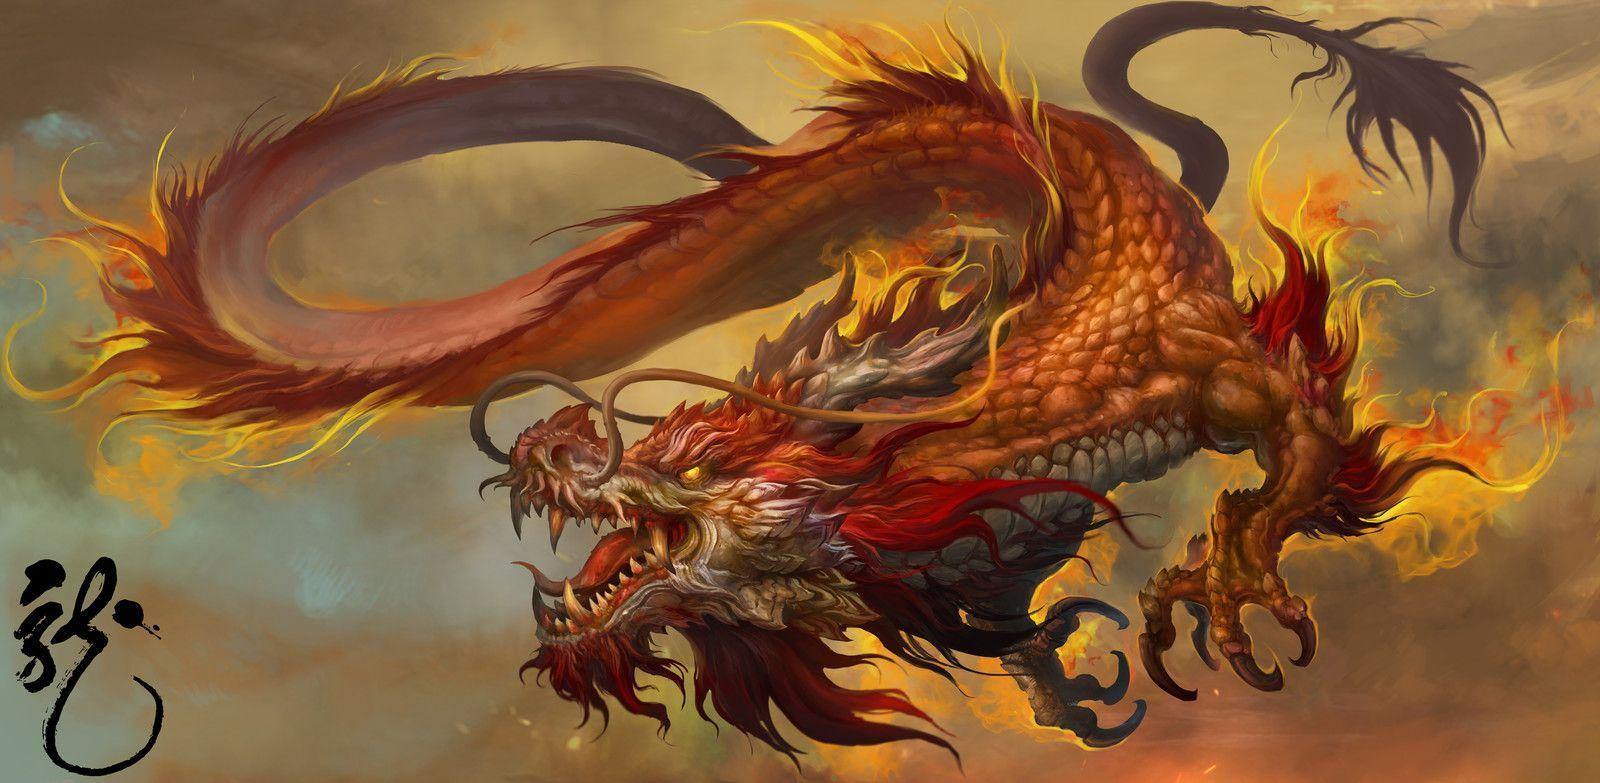 Related image. Dragon. Chinese dragon, Dragons and Artwork